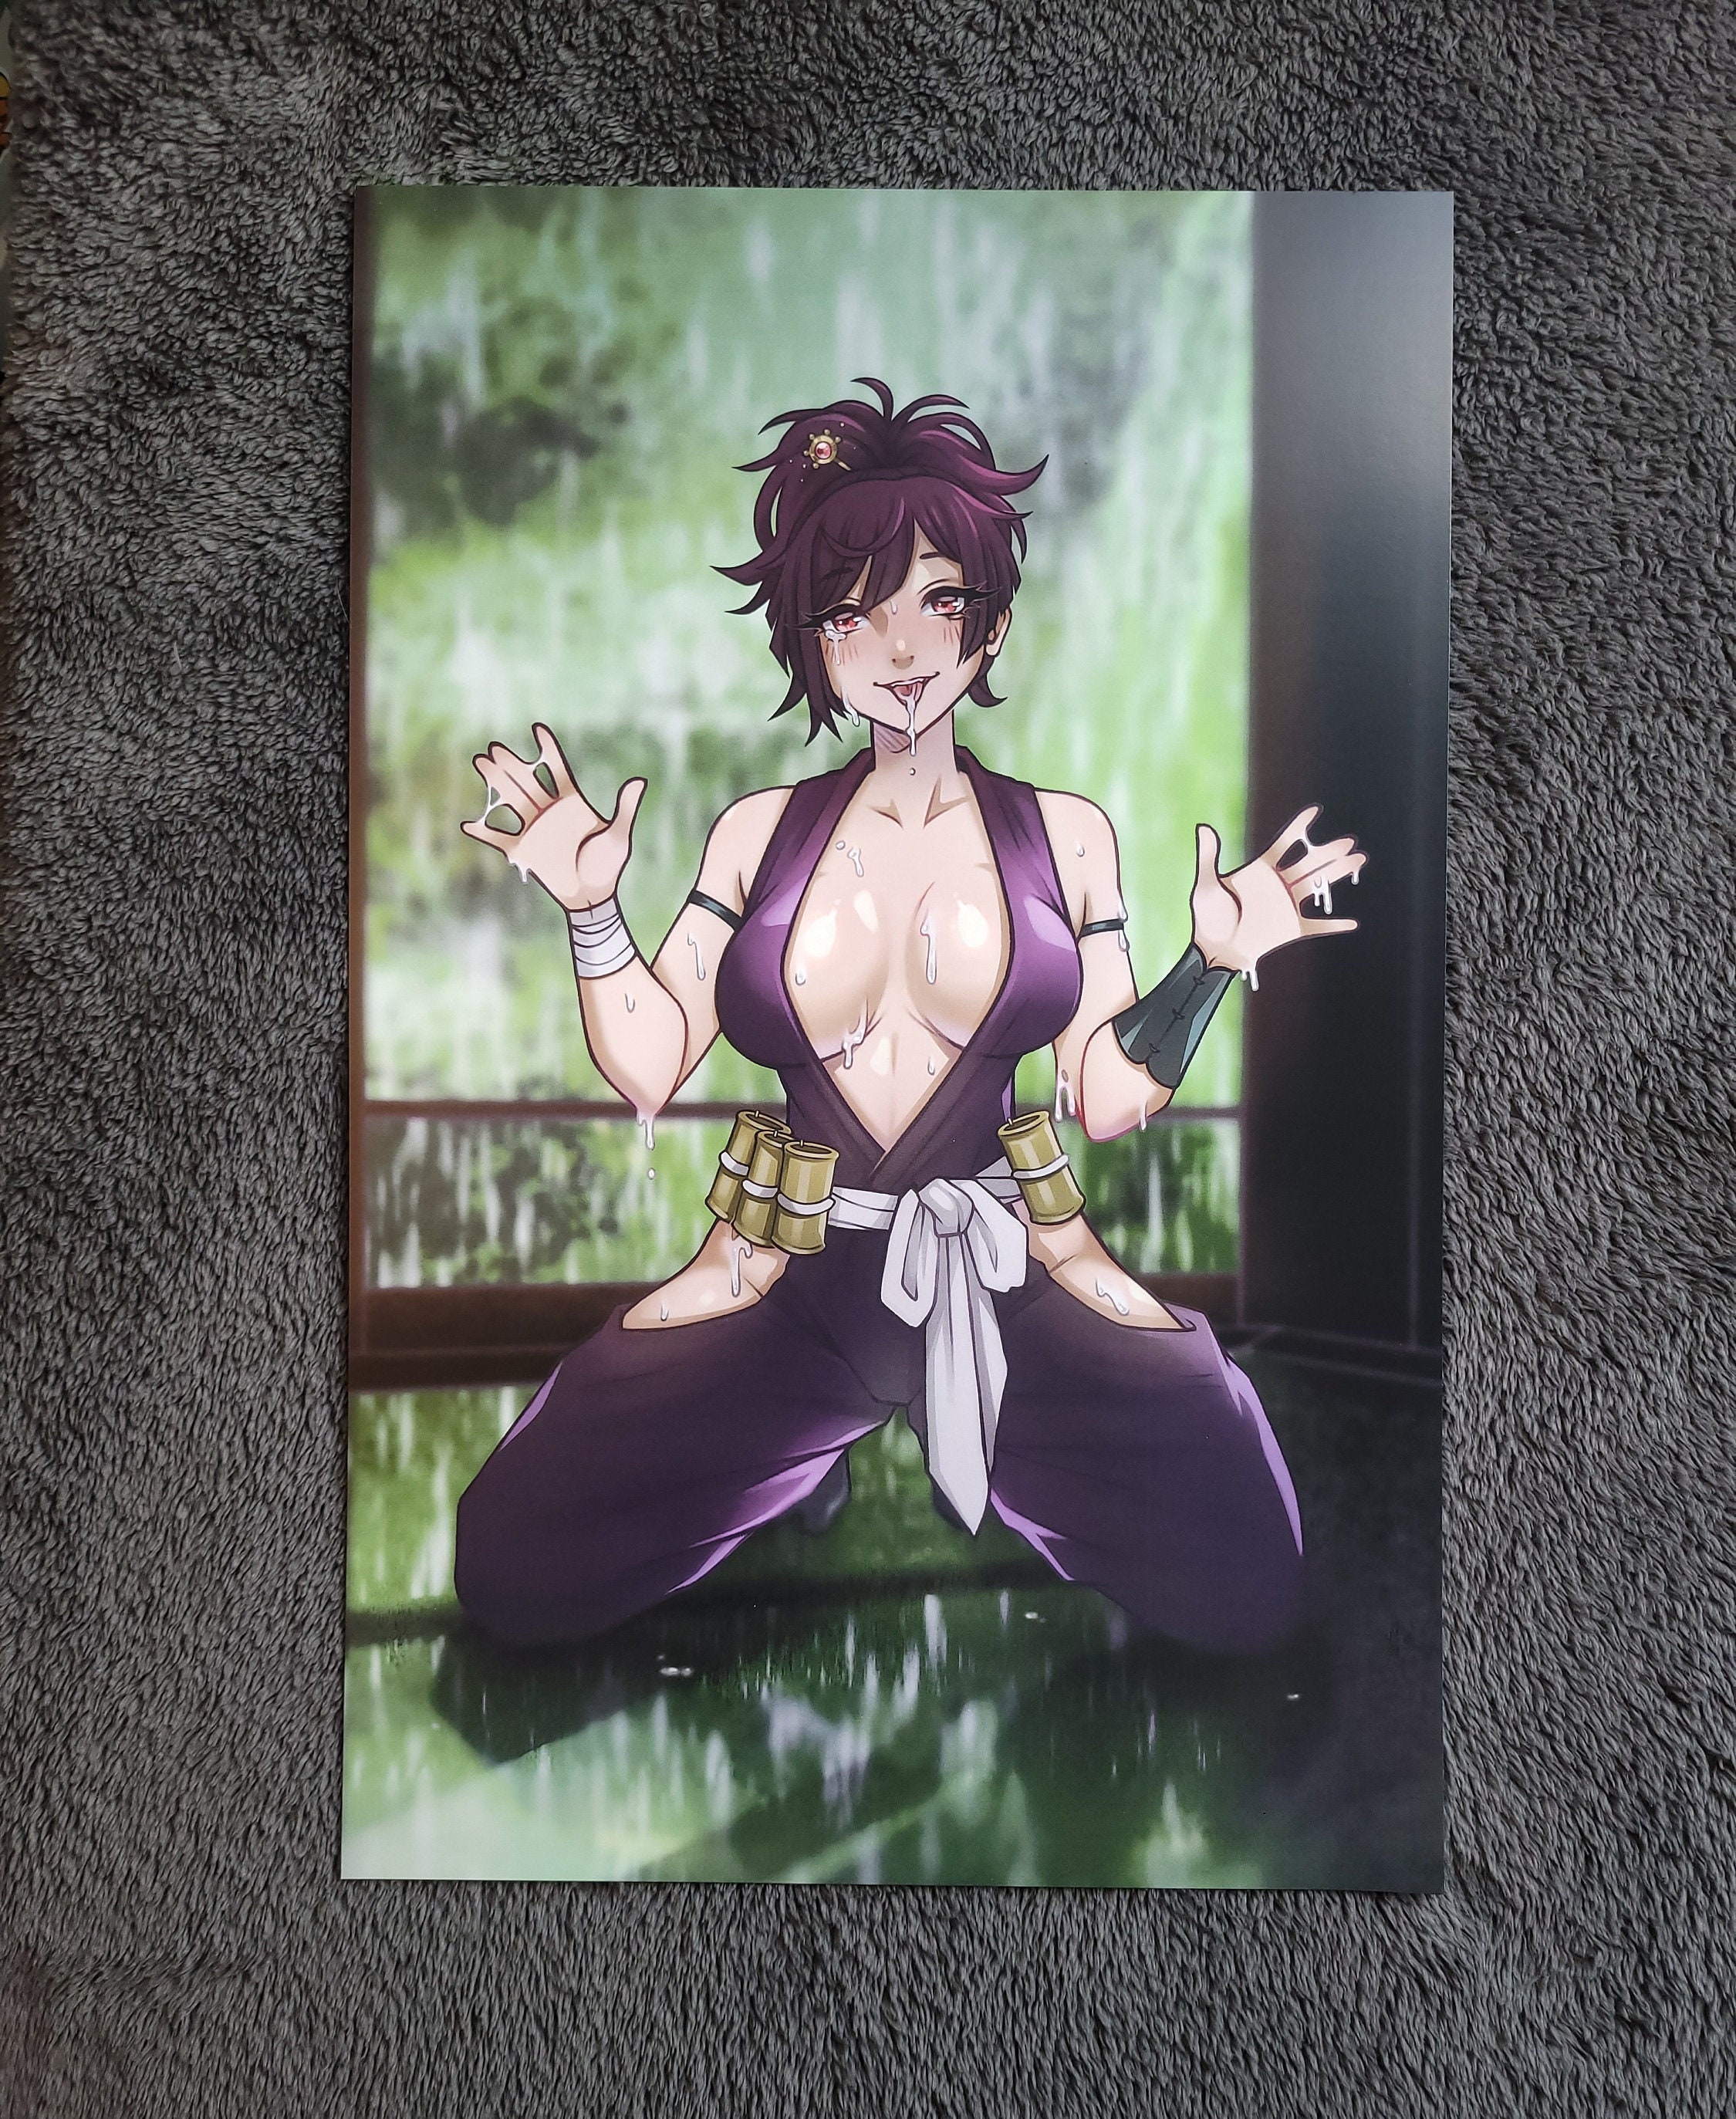  XIANNA Hell's Paradise Jigokuraku Anime Poster (15) Room  Aesthetic Poster Print Art Wall Painting Canvas Posters Gifts Modern  Bedroom Decor 12x18inch(30x45cm): Posters & Prints